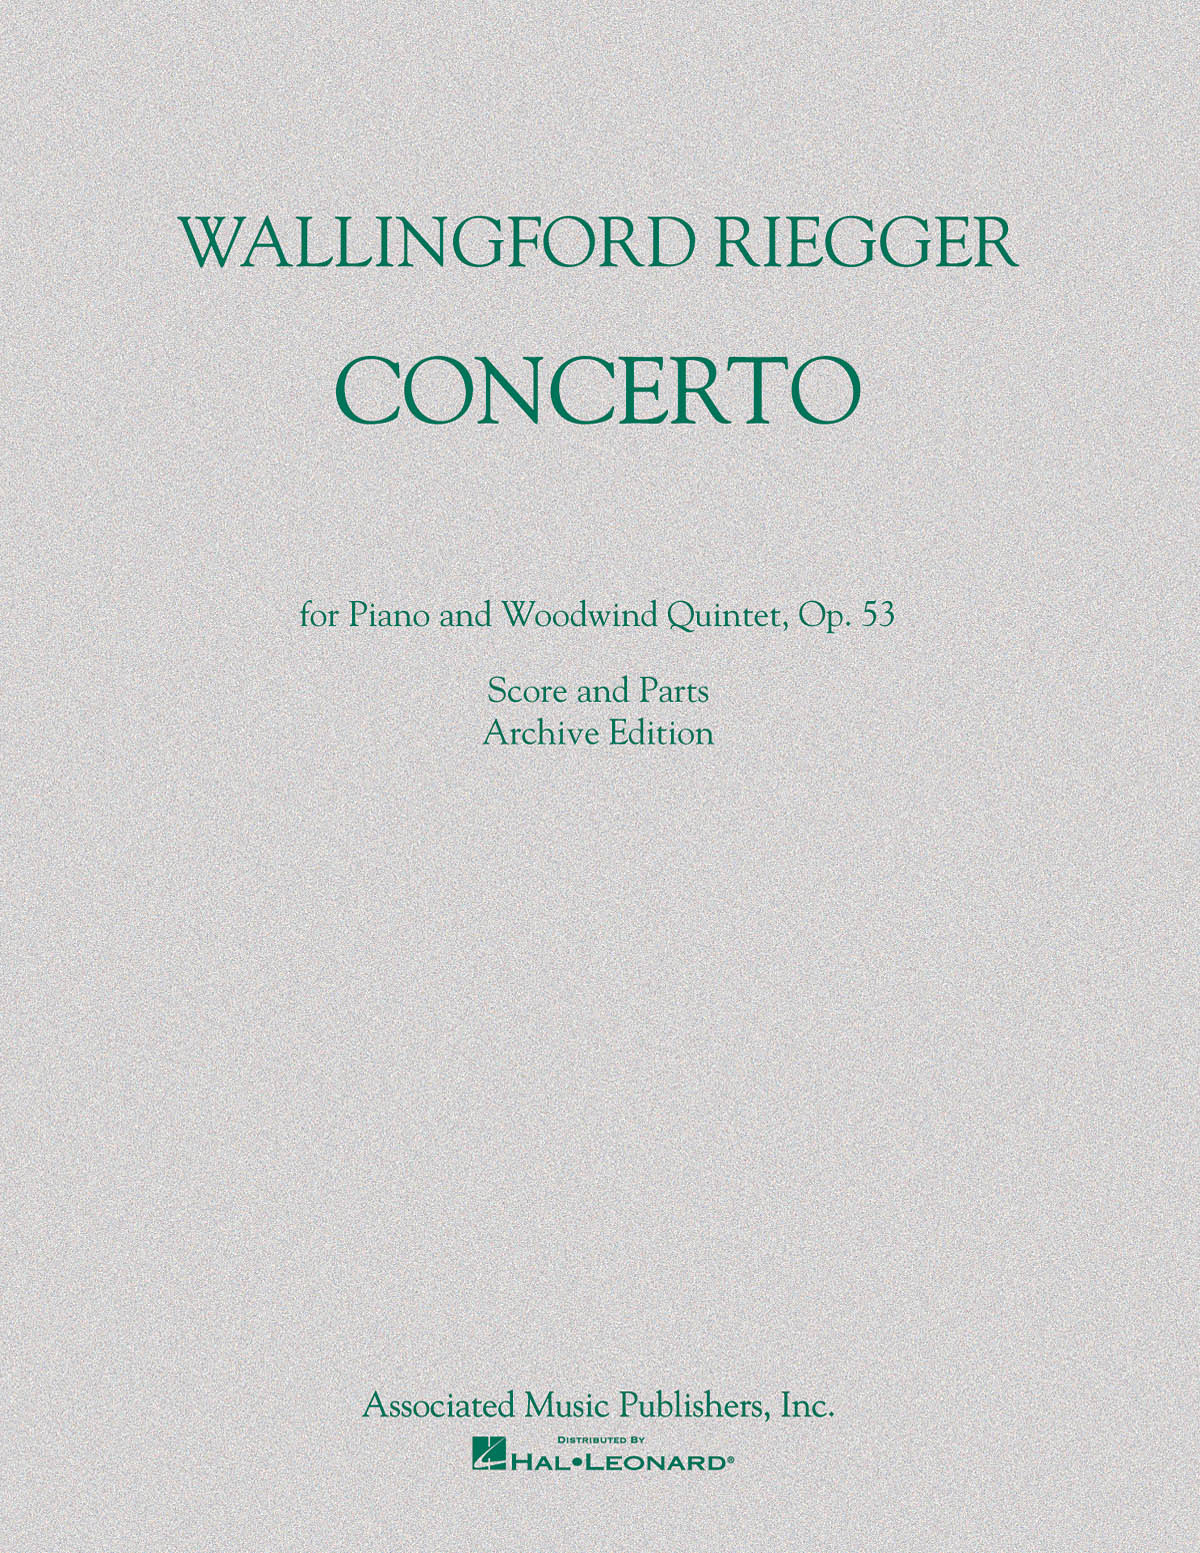 Wallingford Riegger: Concerto for Piano and Woodwind Quintet  Op. 53: Wind